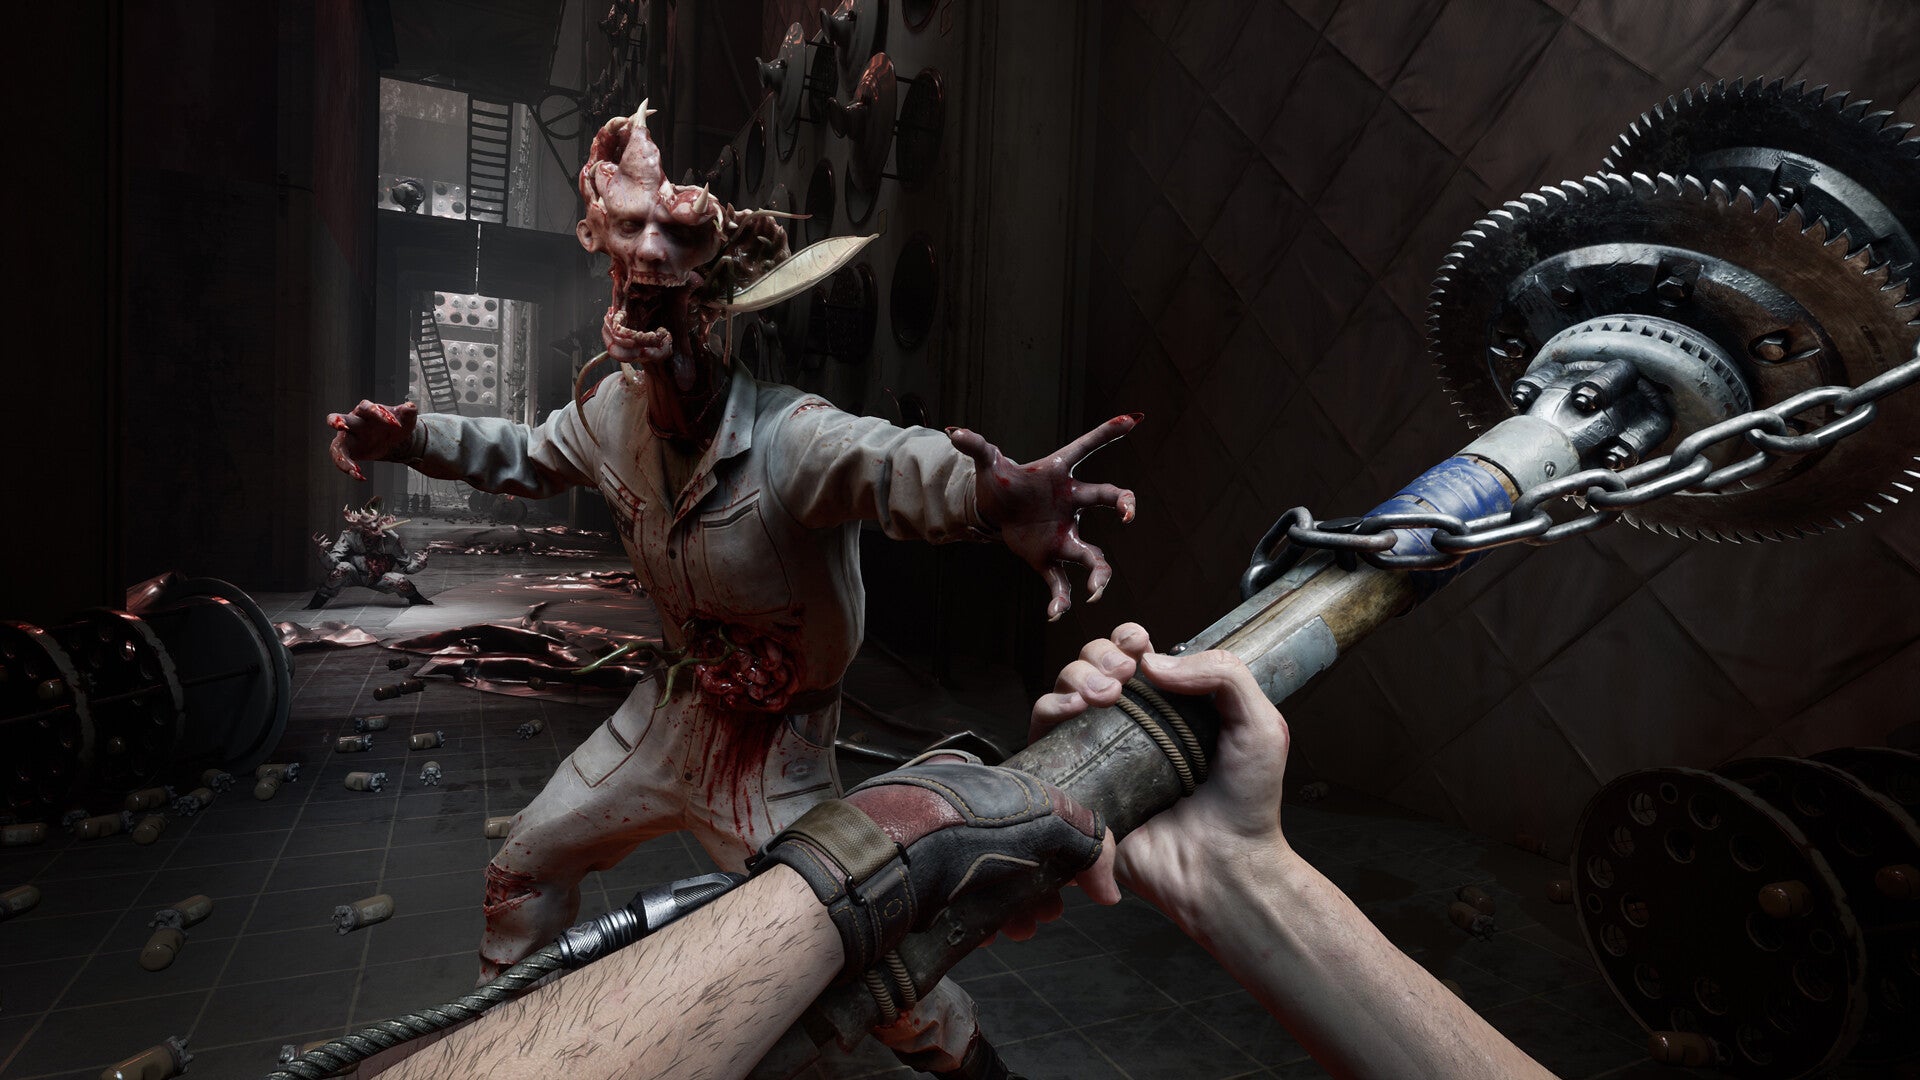 Atomic Heart's protagonist swinging a spiked bat at an enemy.